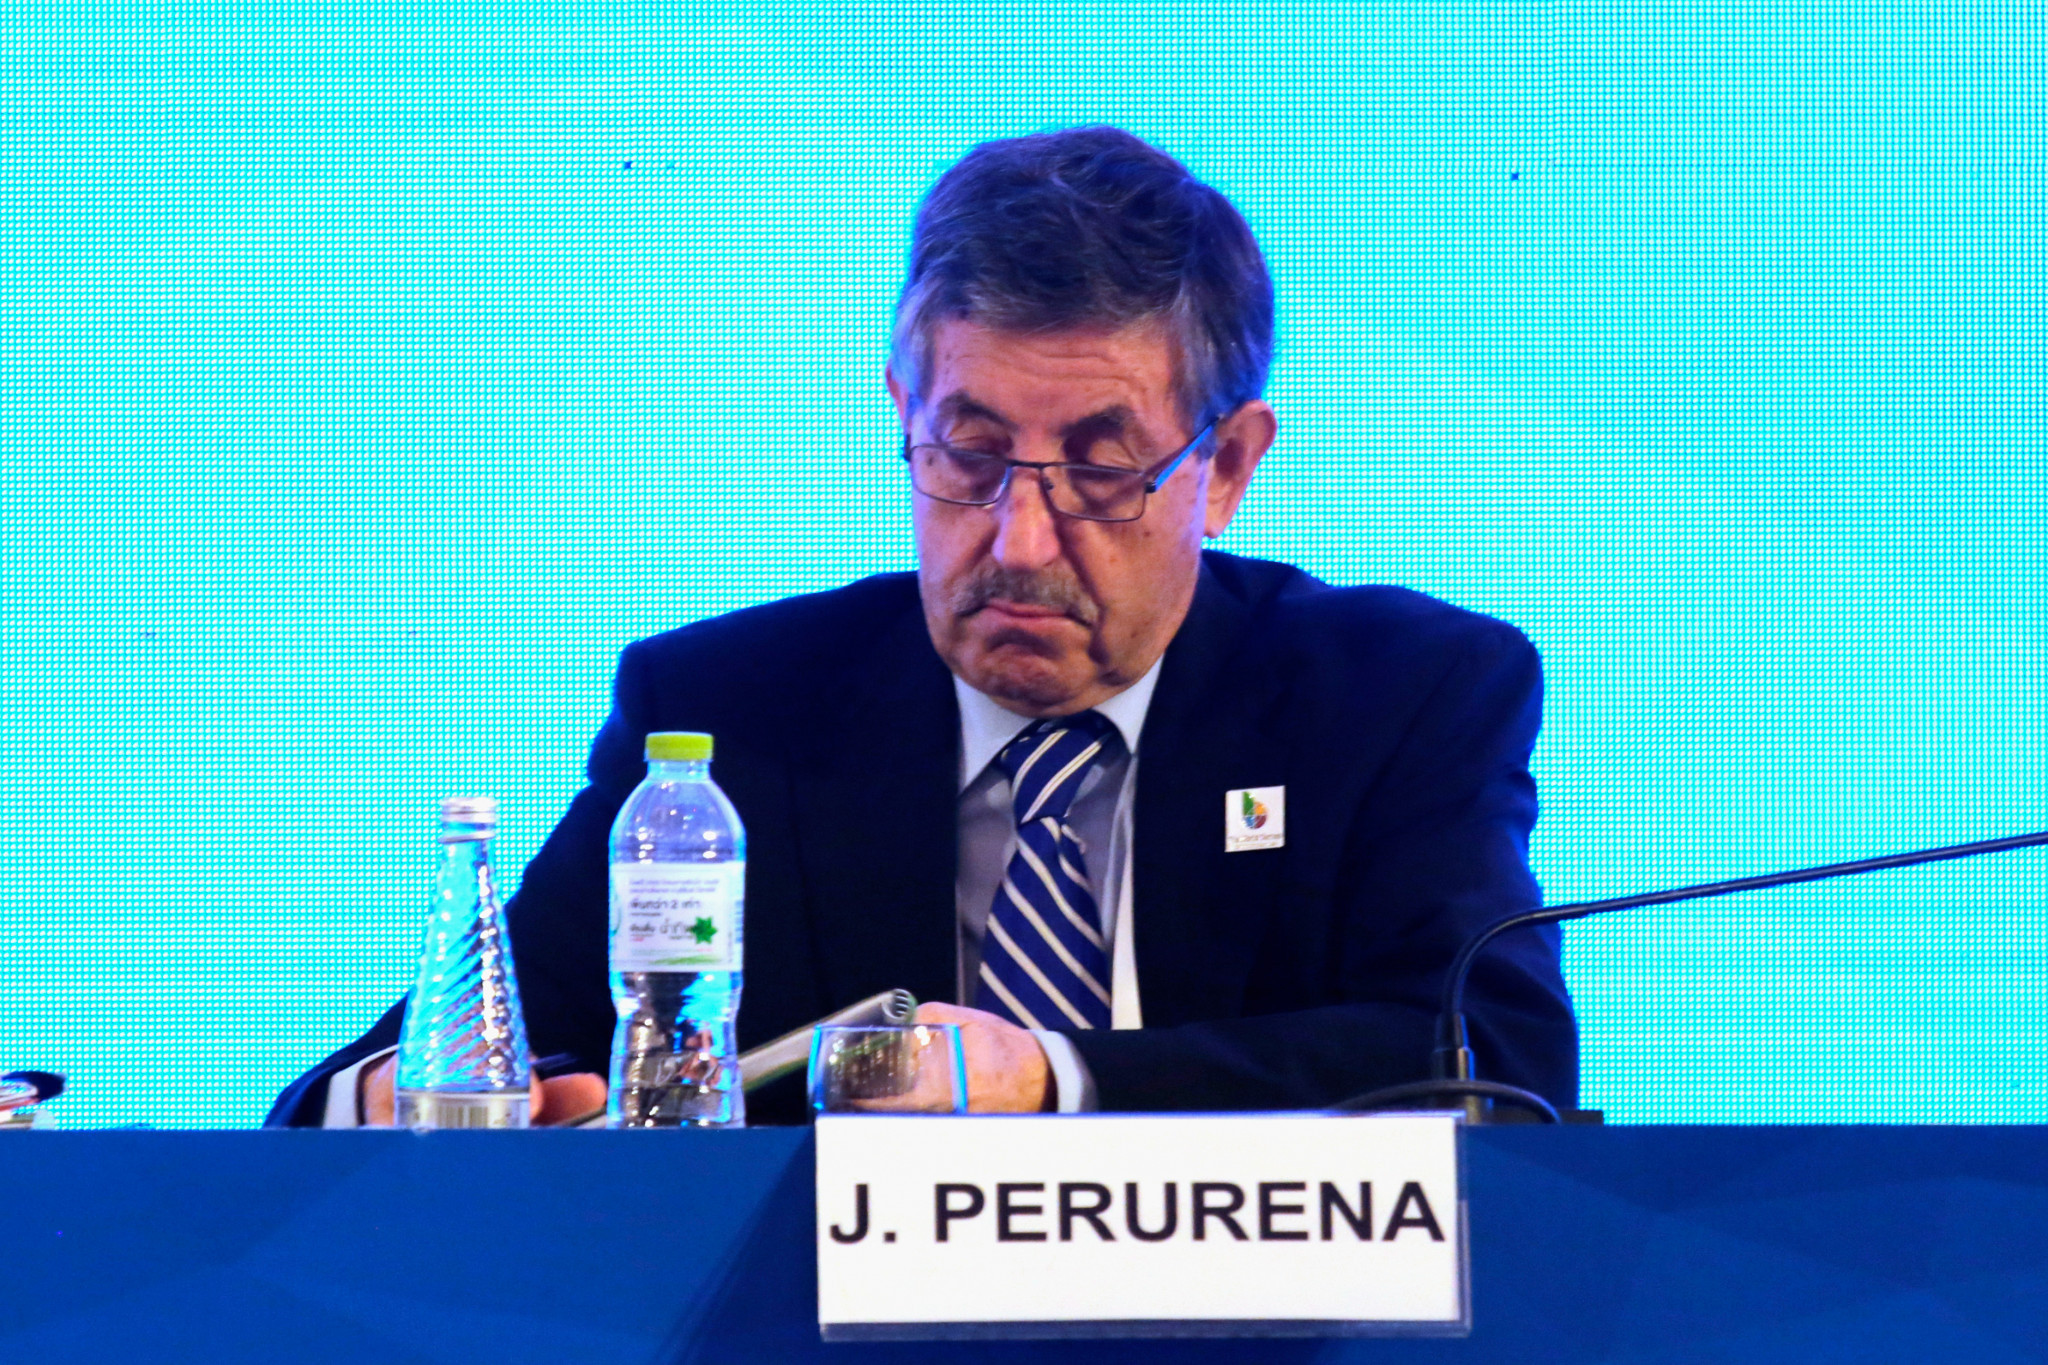 The International Canoe Federation is set to elect a replacement for Jose Perurena at its ongoing virtual Congress ©Getty Images